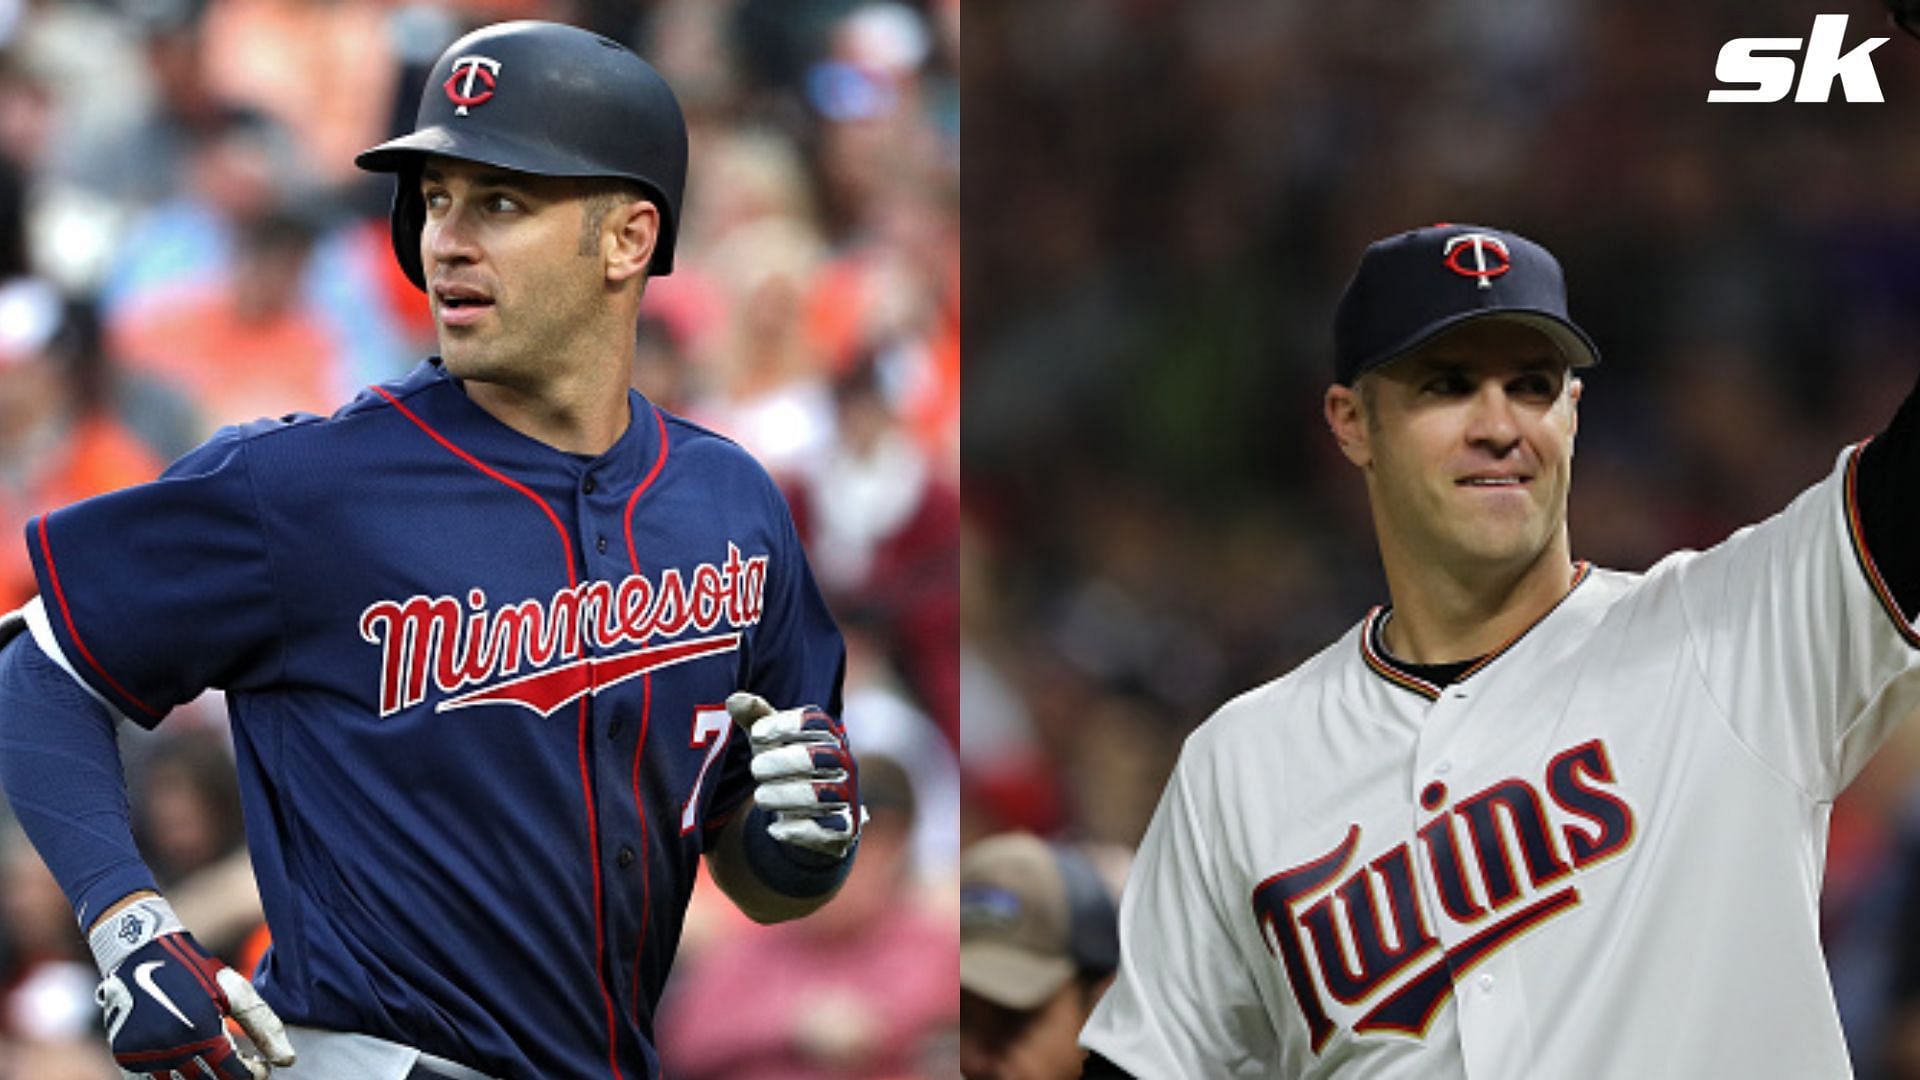 Joe Mauer circumspect of his chances after Hall of Fame nomination: &quot;We